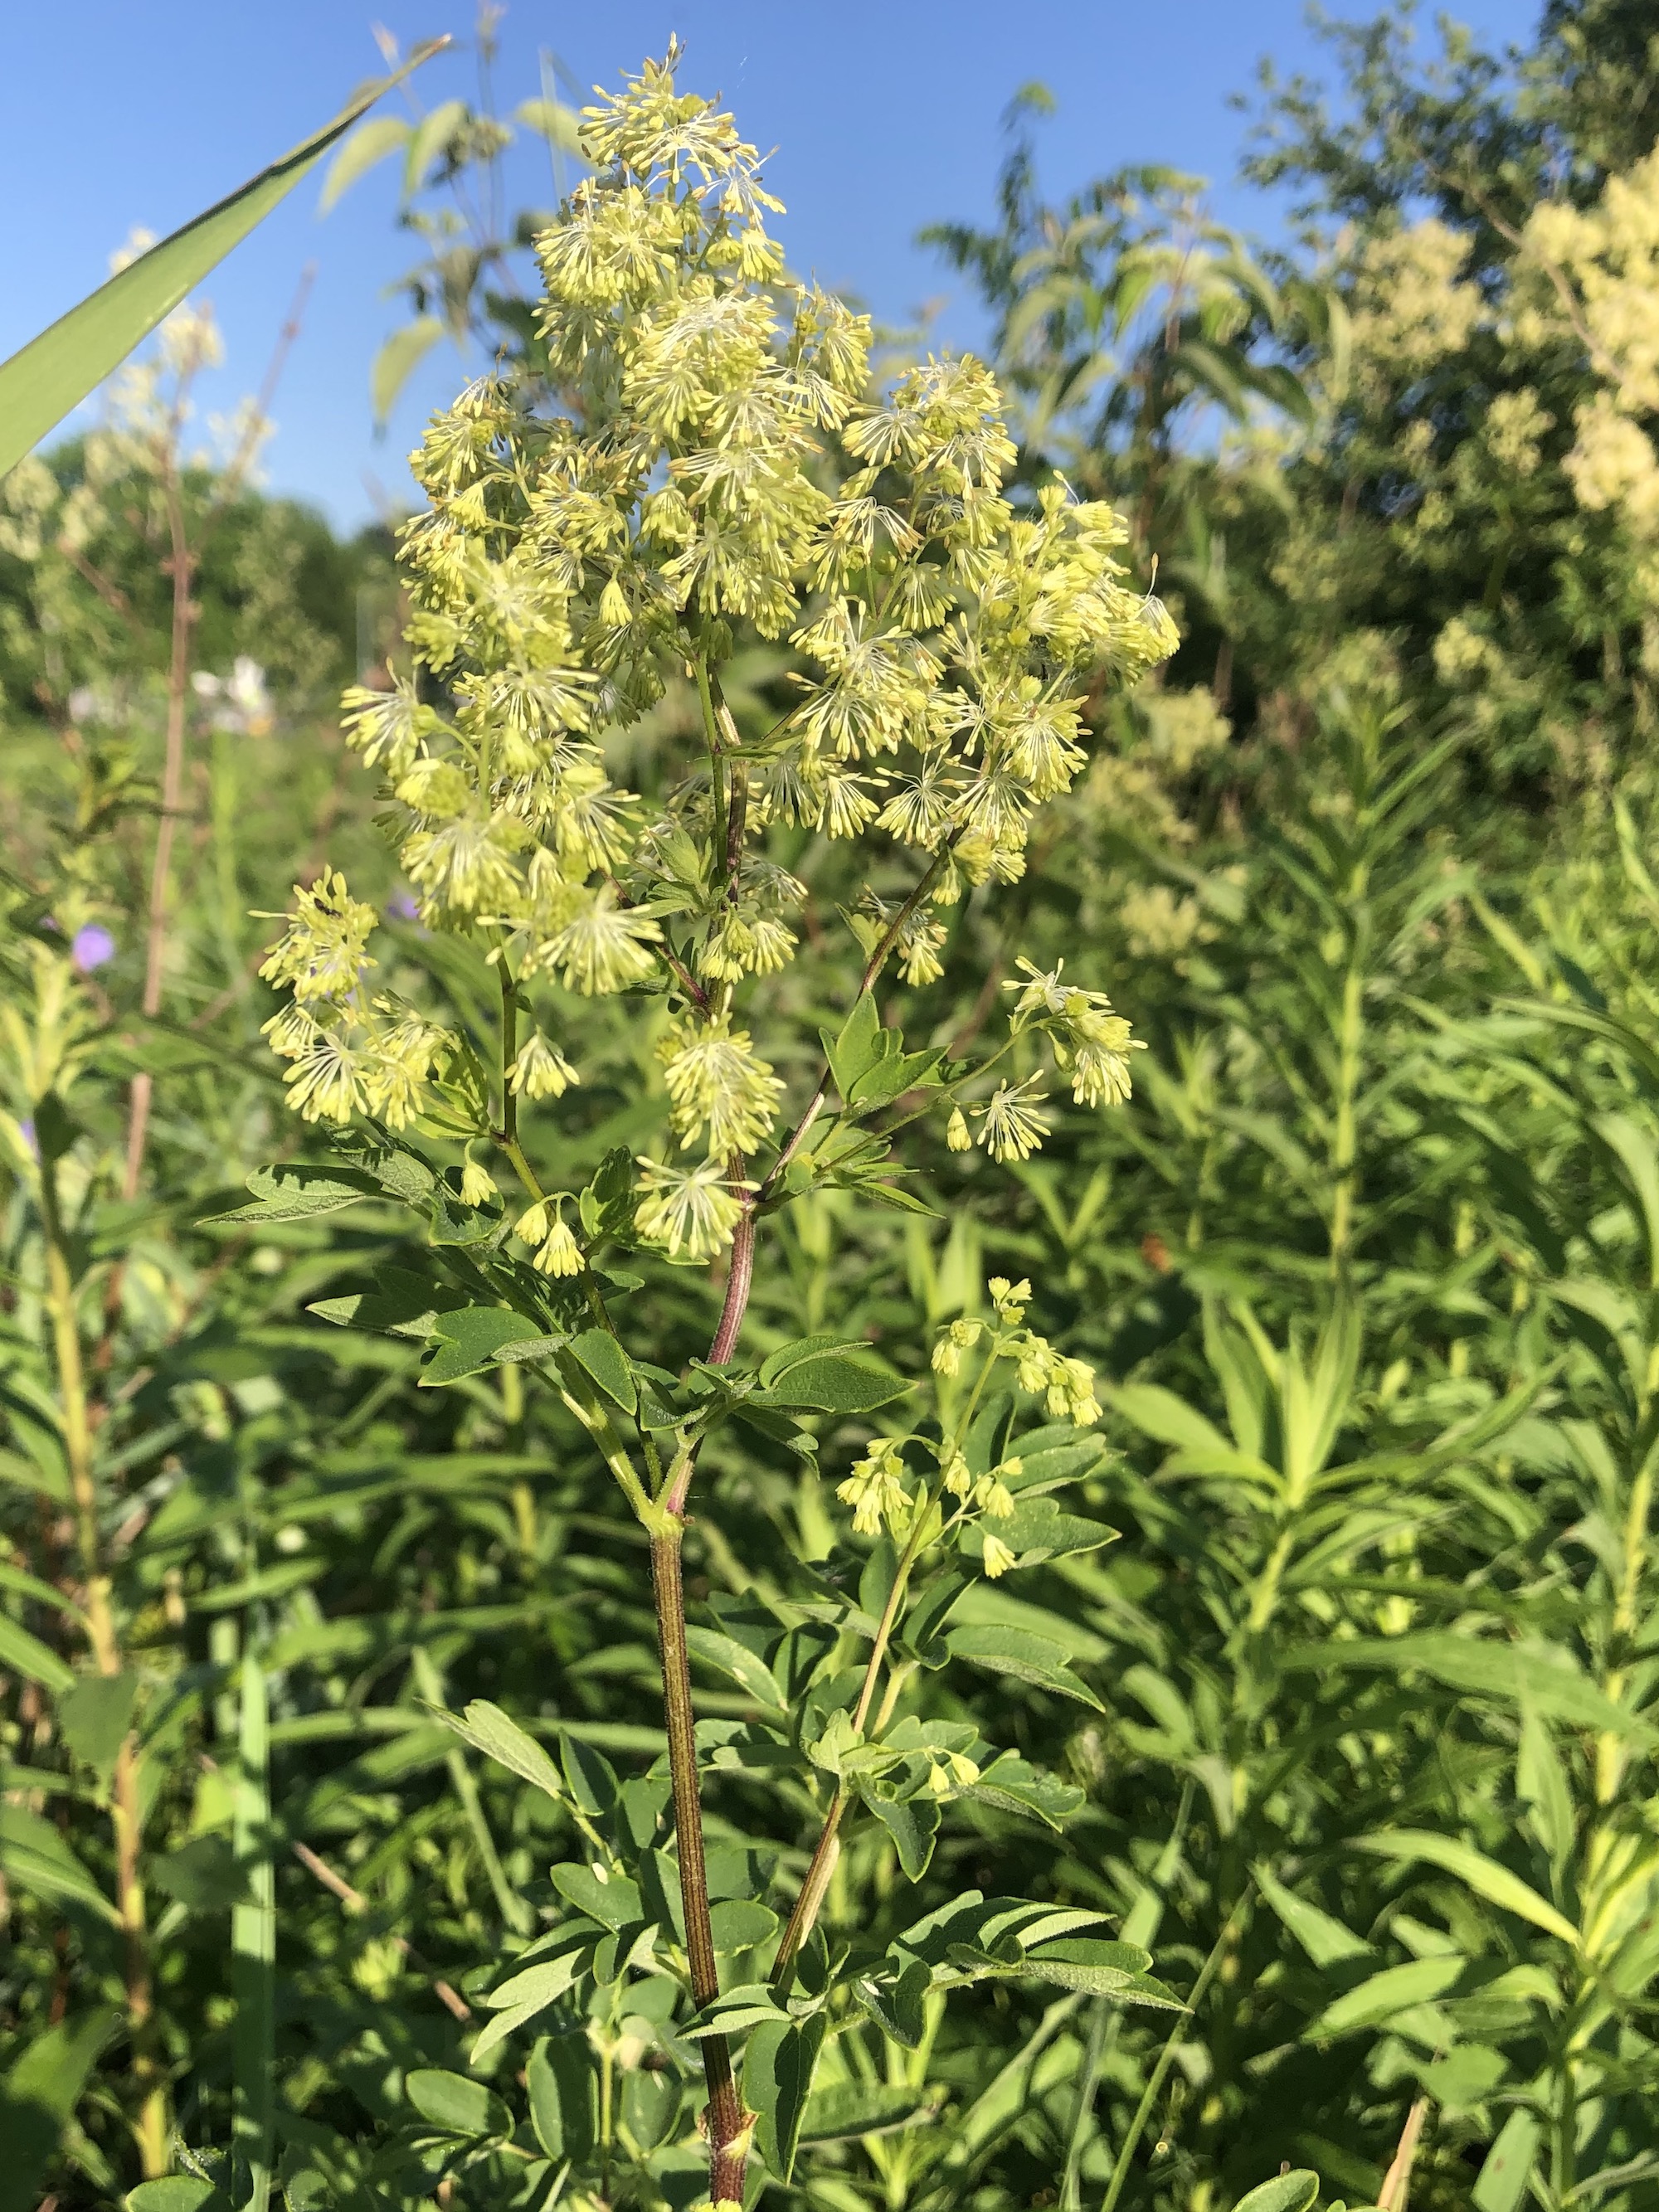 Tall Meadow-rue on shore of Marion Dunn Pond on June 17, 2020.